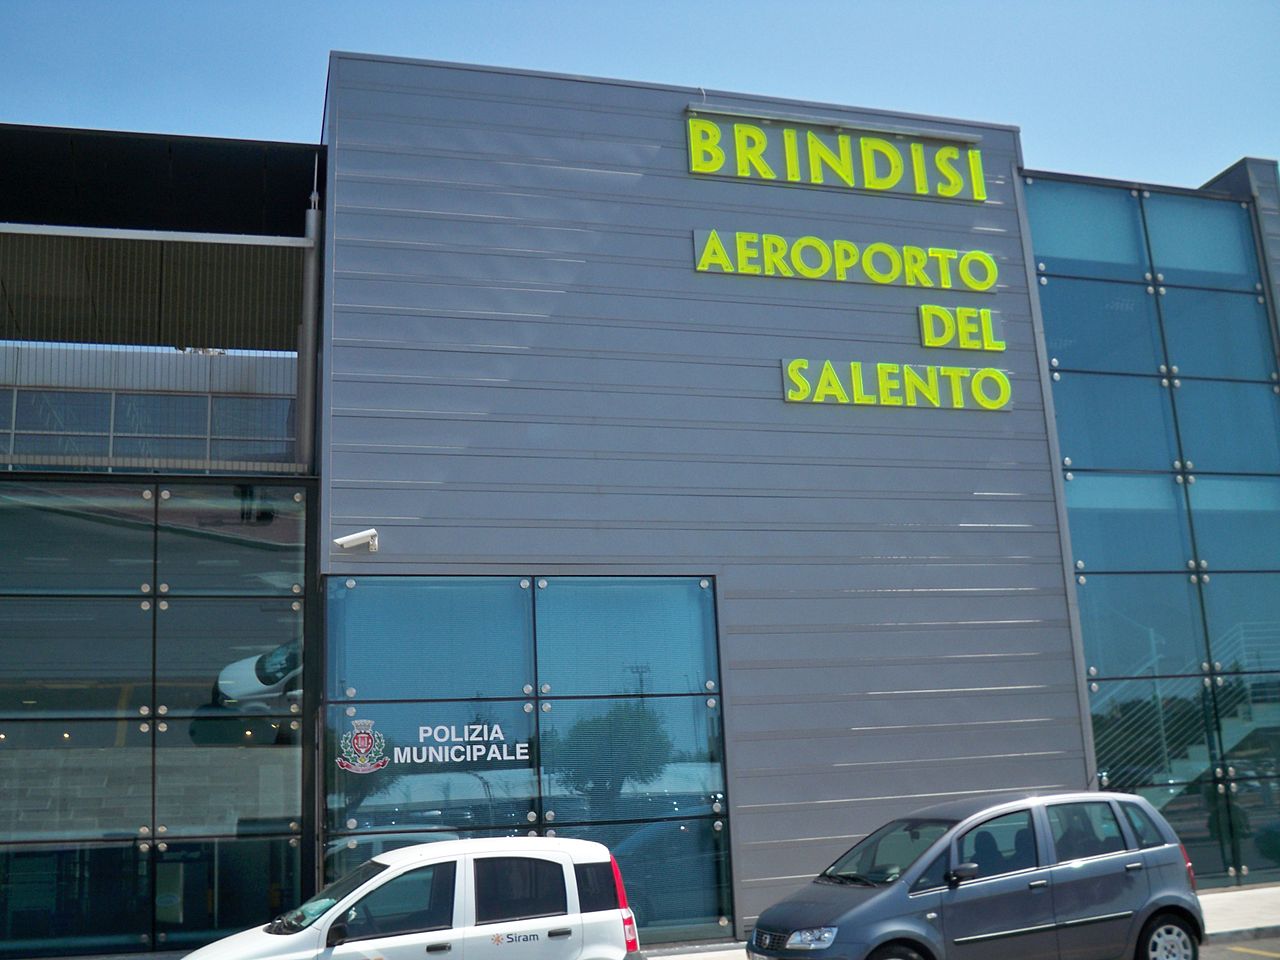 Brindisi Airport is a focus city for Ryanair.